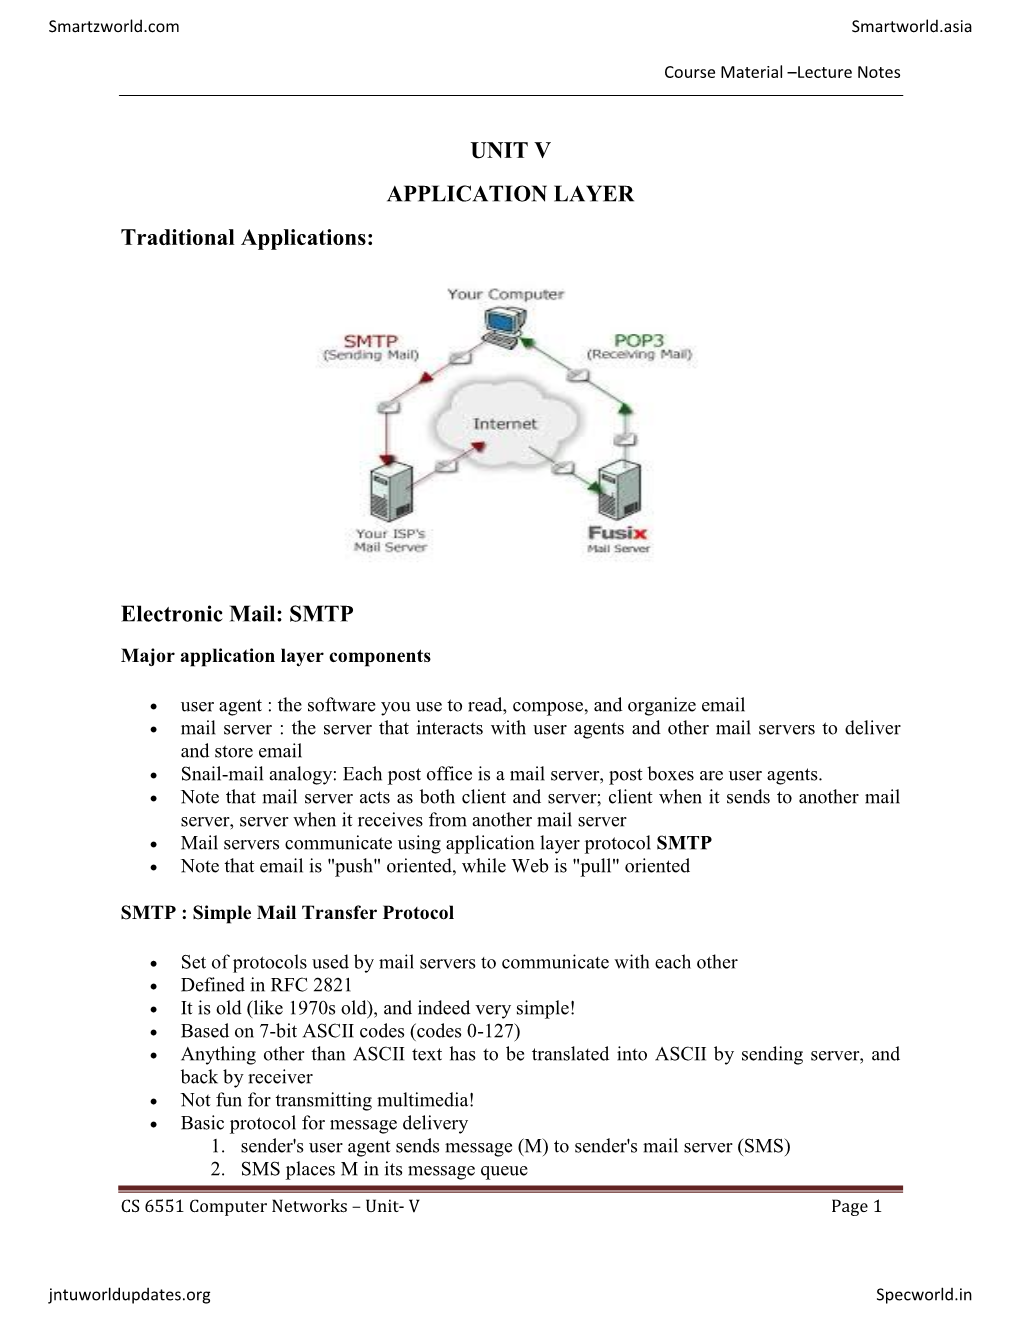 Electronic Mail: SMTP Major Application Layer Components